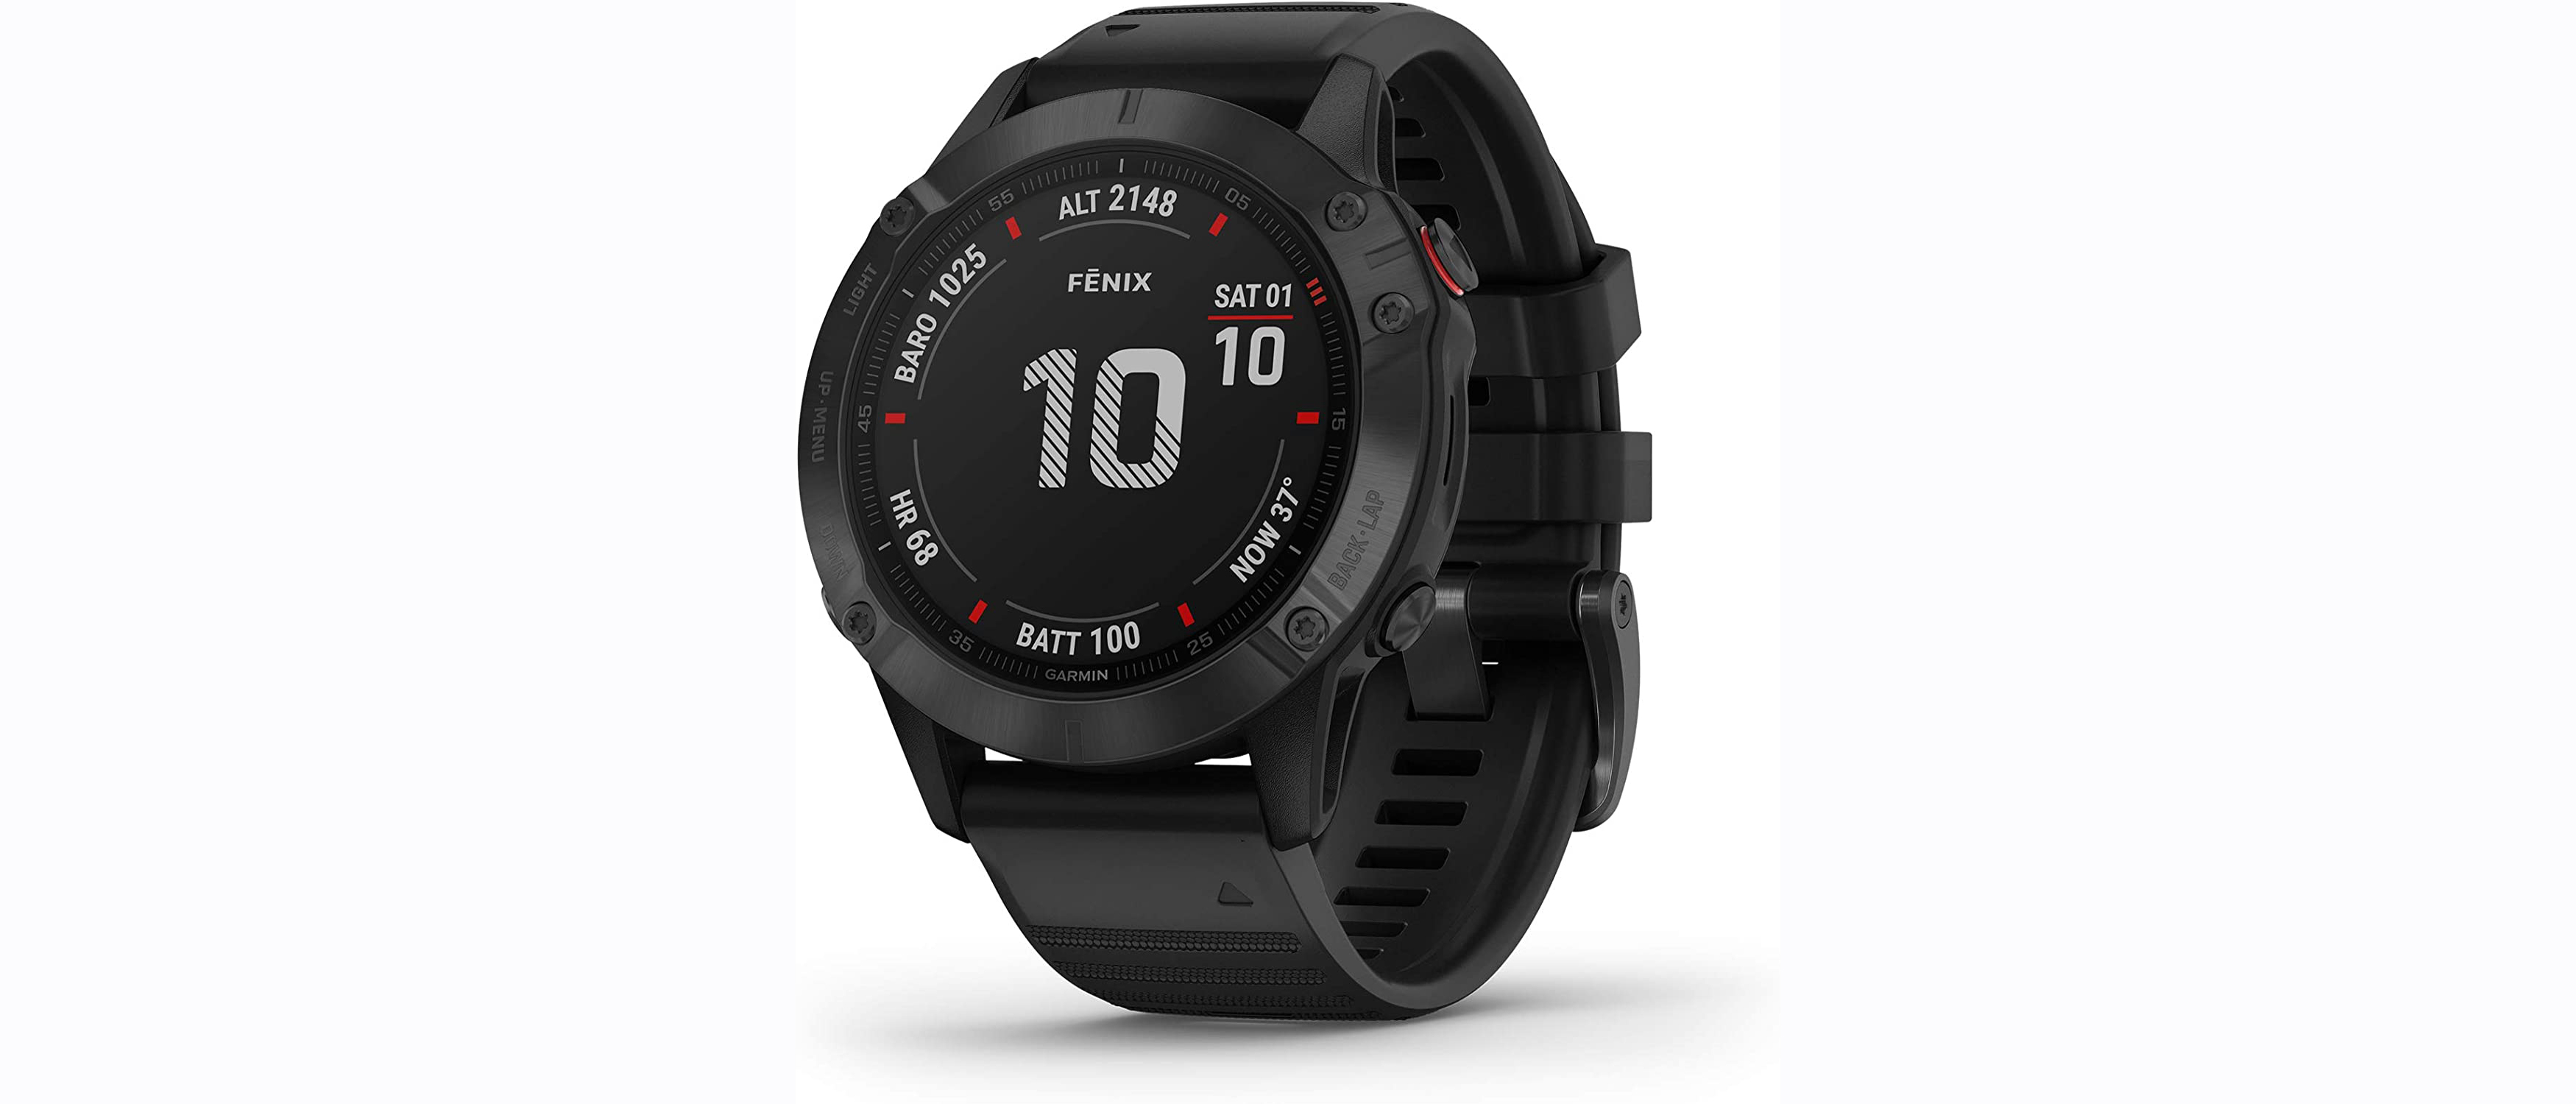 The Garmin Fenix 6 Pro is one of our favorite running watches – and now  it's $150 cheaper